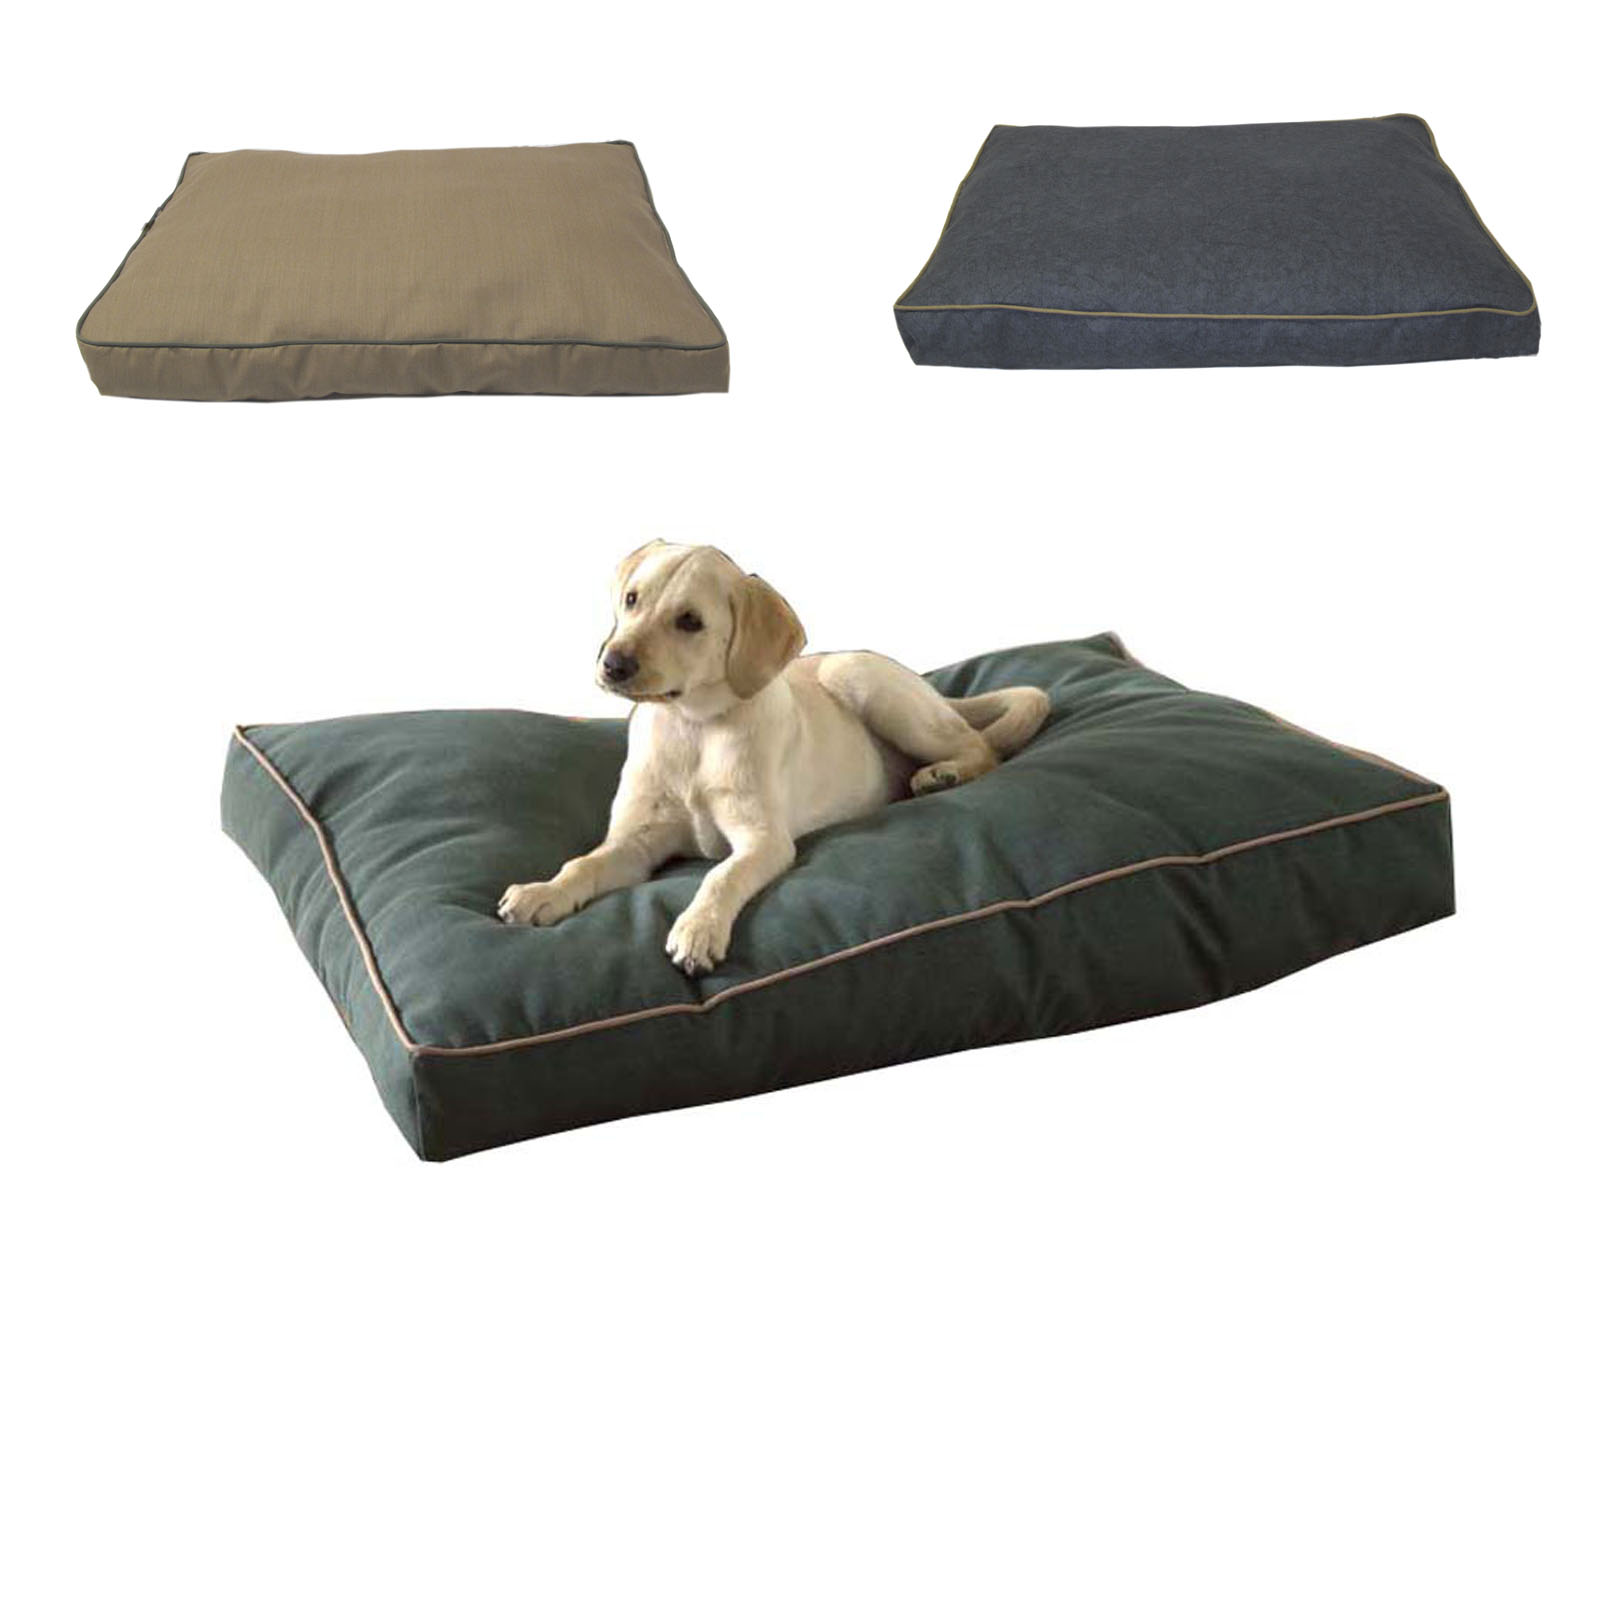 Carolina Pet Company Large Indoor/ Outdoor Faux Gusset "Jamison" Bed